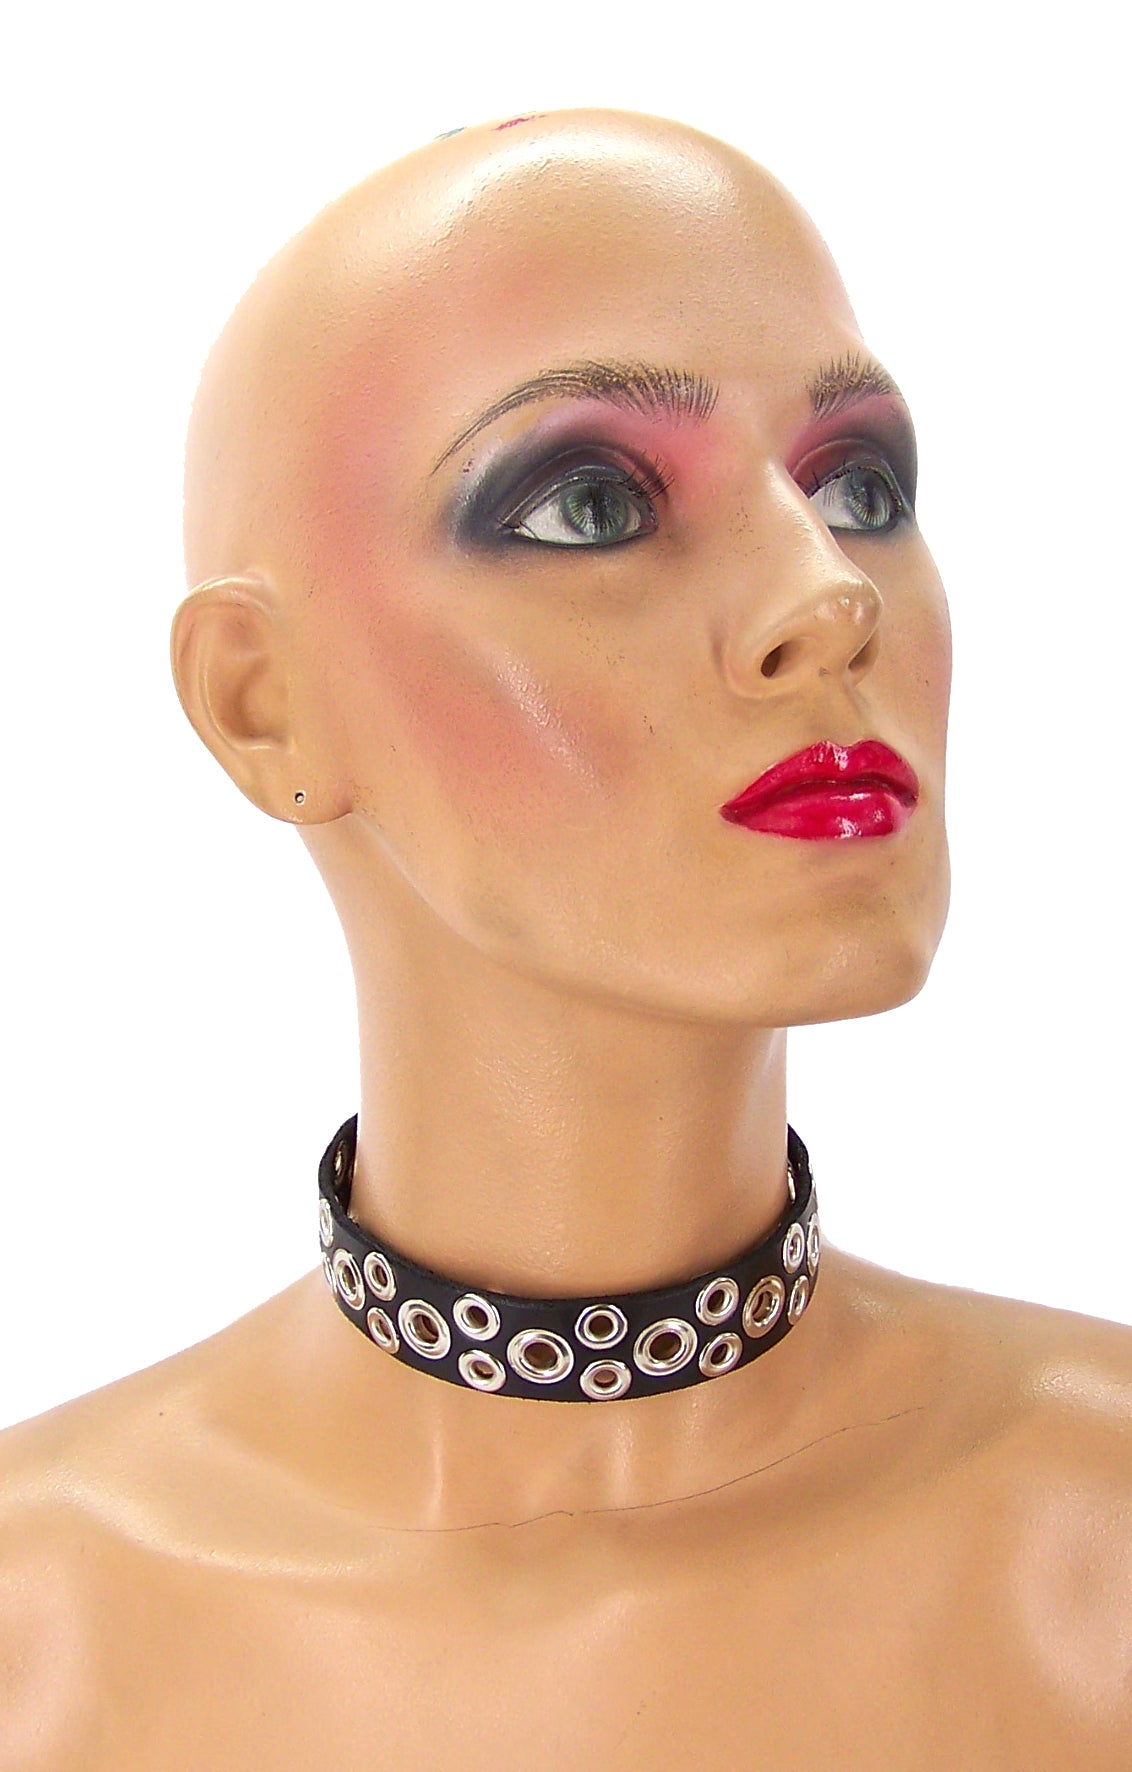 Mannequin wearing black leather tentacle choker